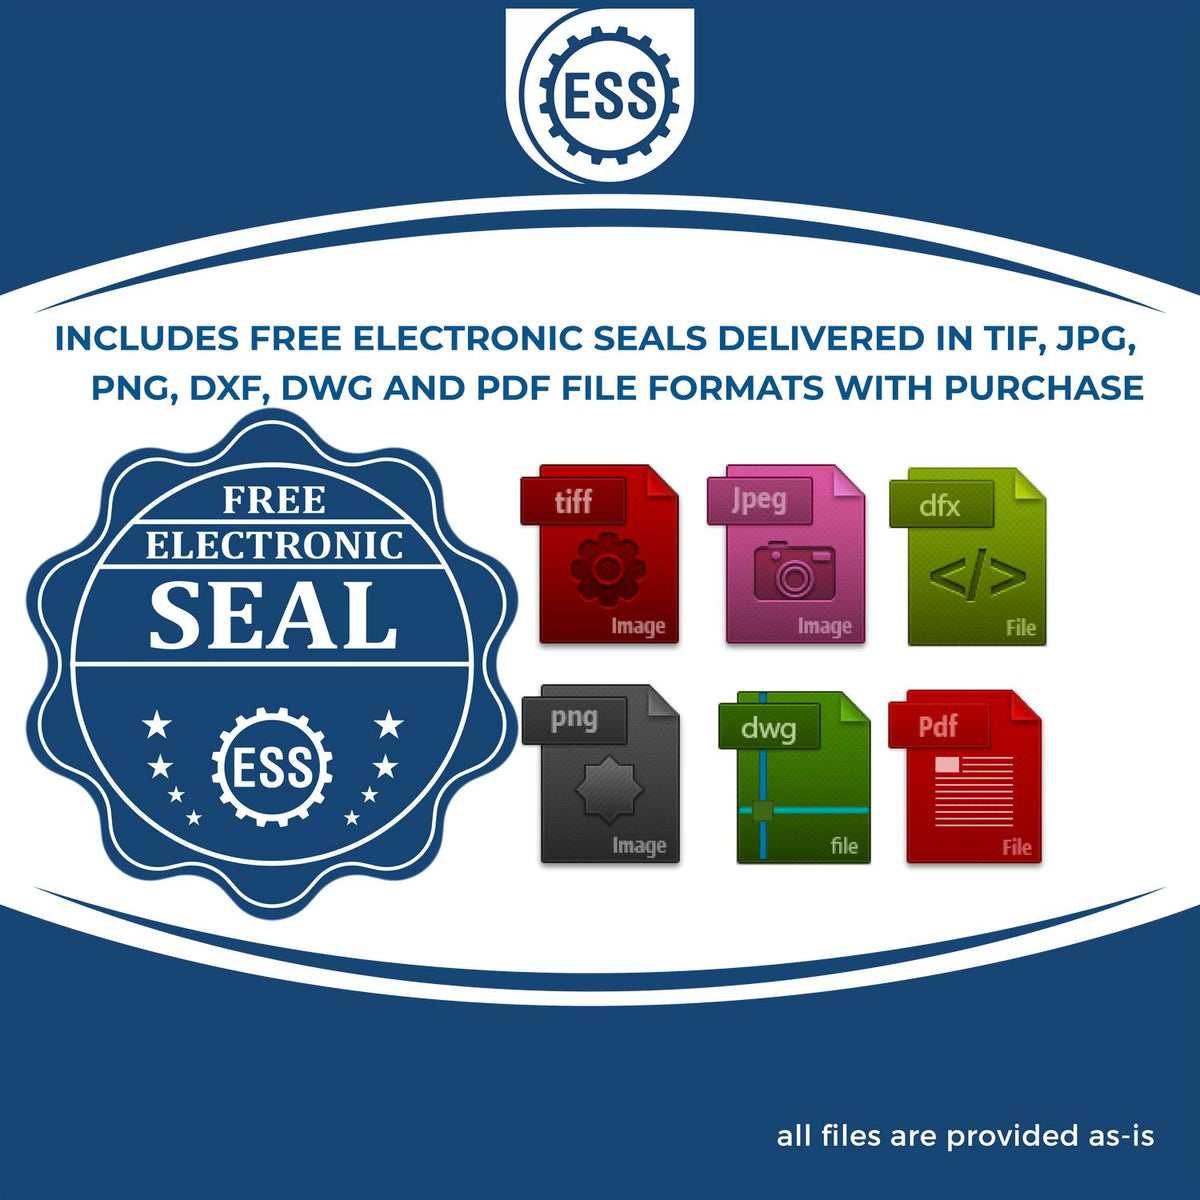 An infographic for the free electronic seal for the Soft Illinois Professional Engineer Seal illustrating the different file type icons such as DXF, DWG, TIF, JPG and PNG.